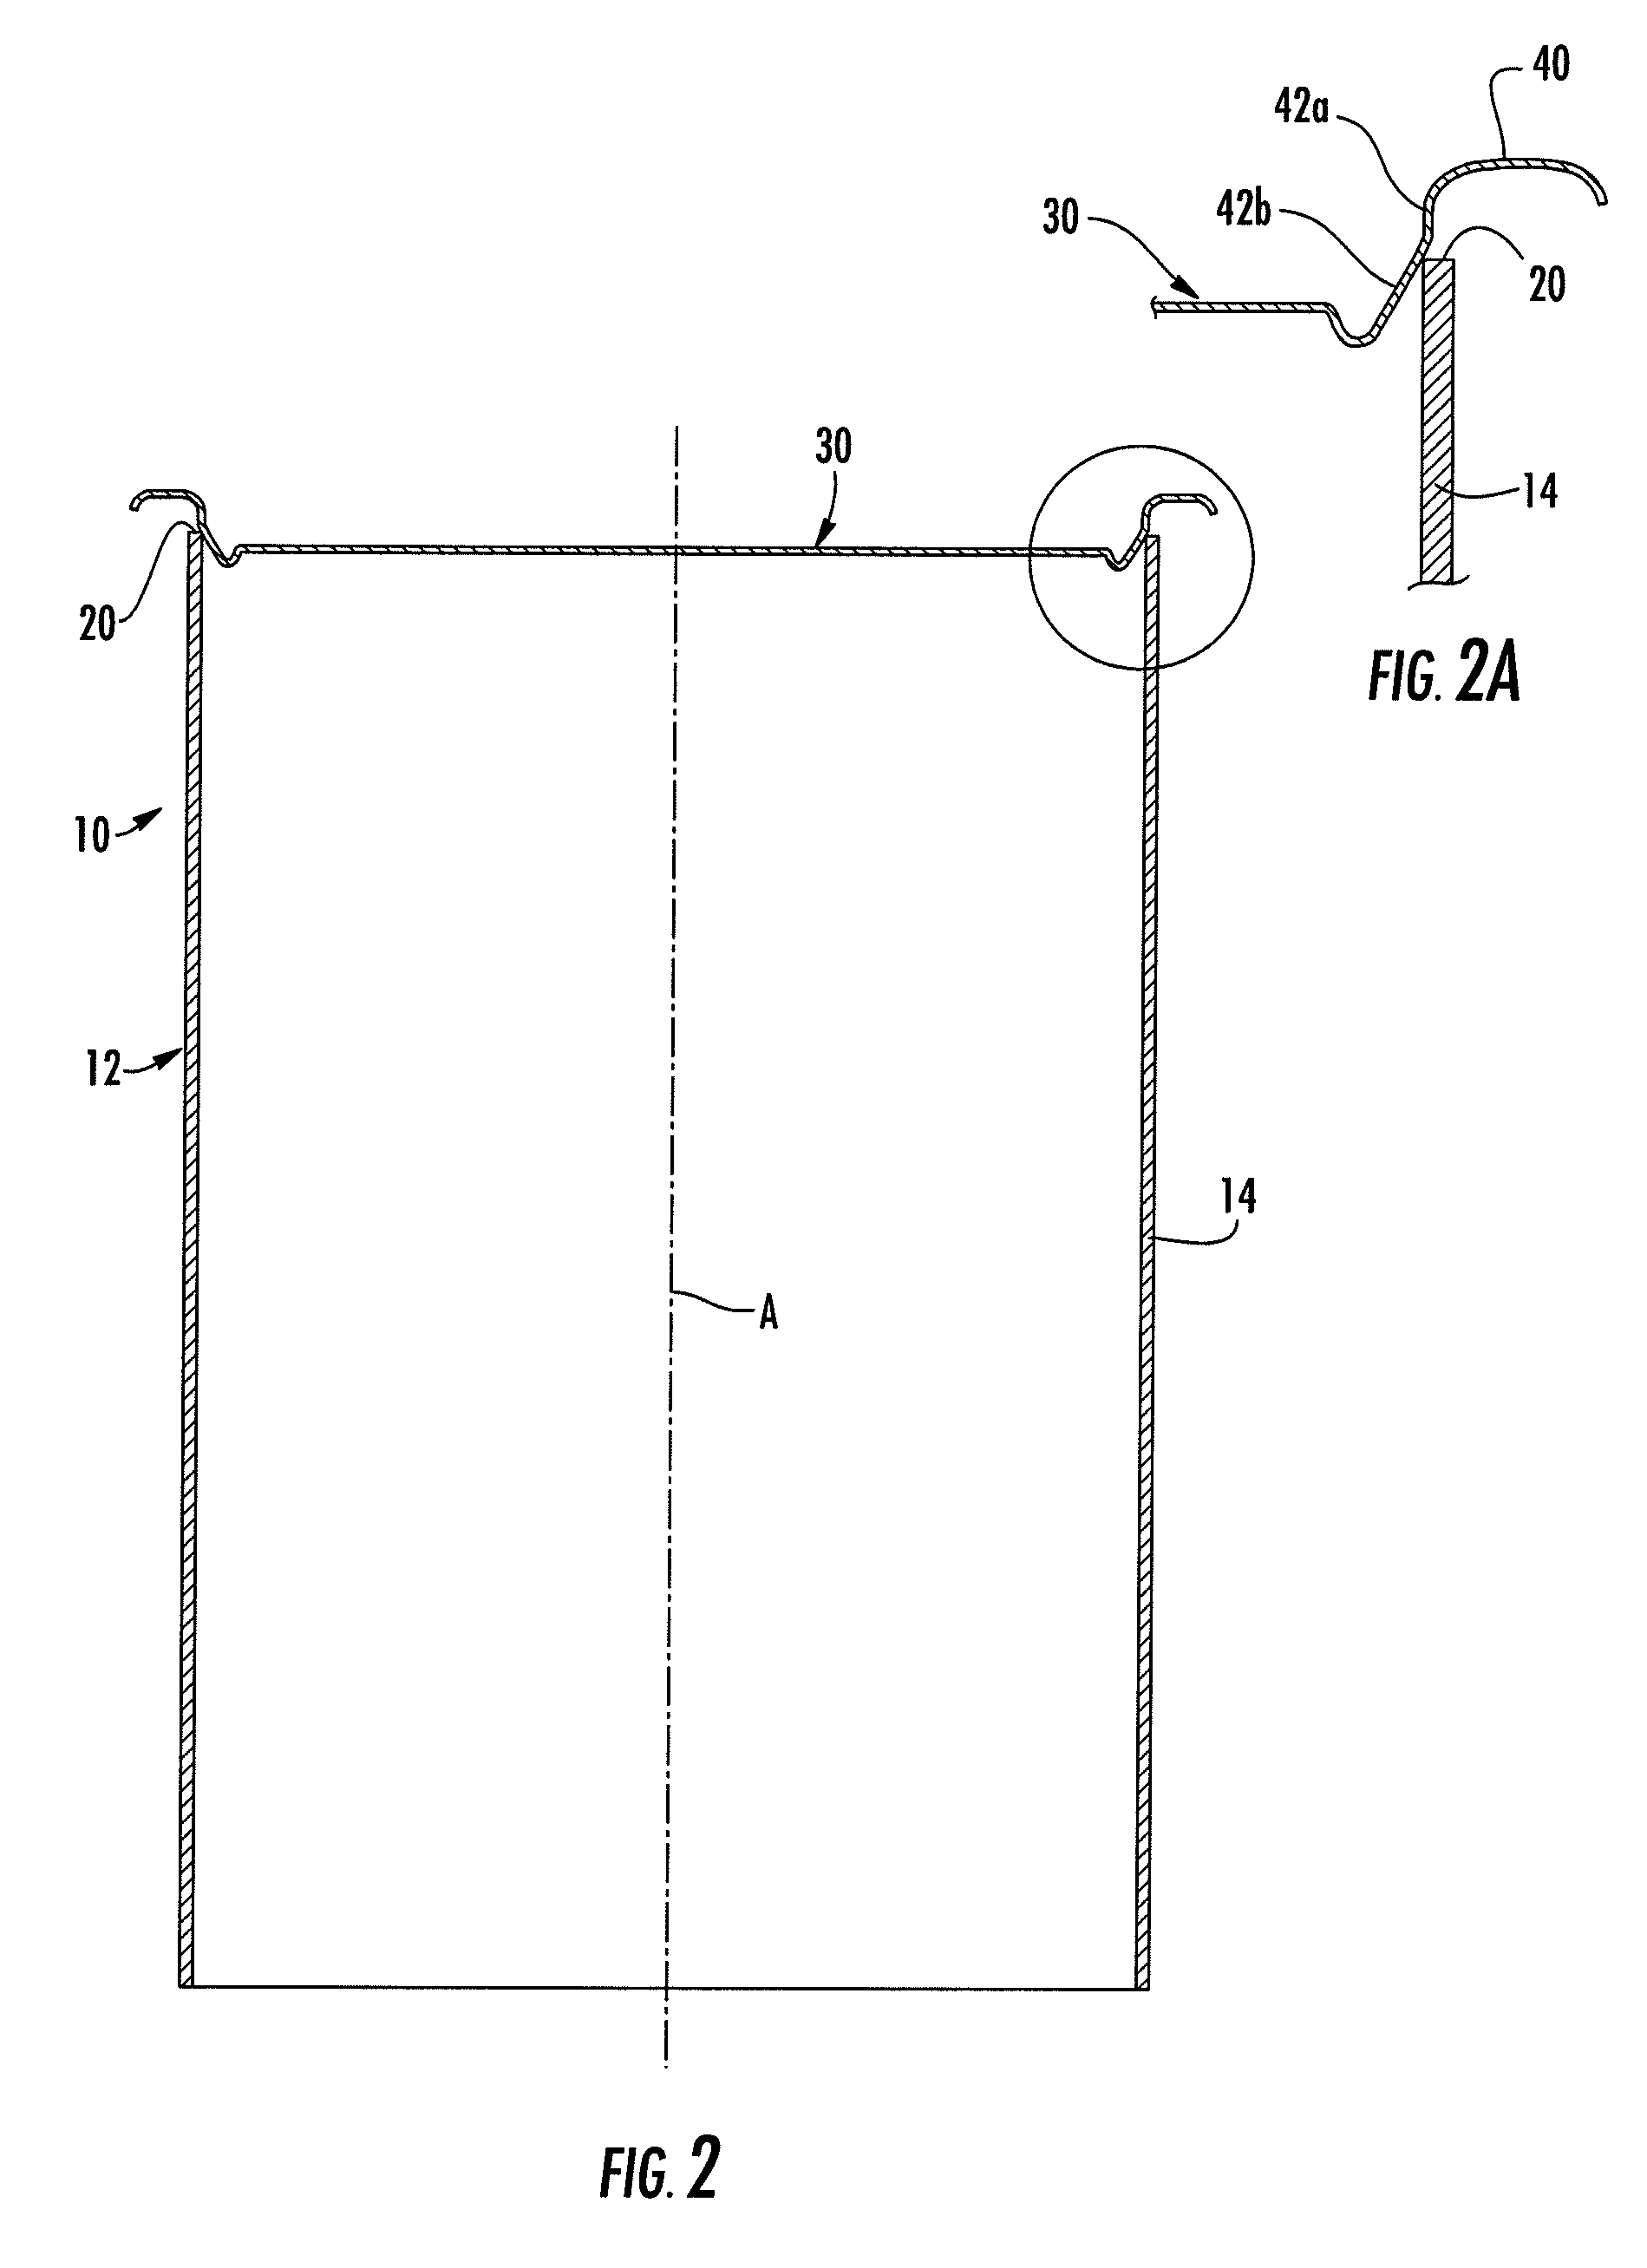 Method for applying a metal end to a container body